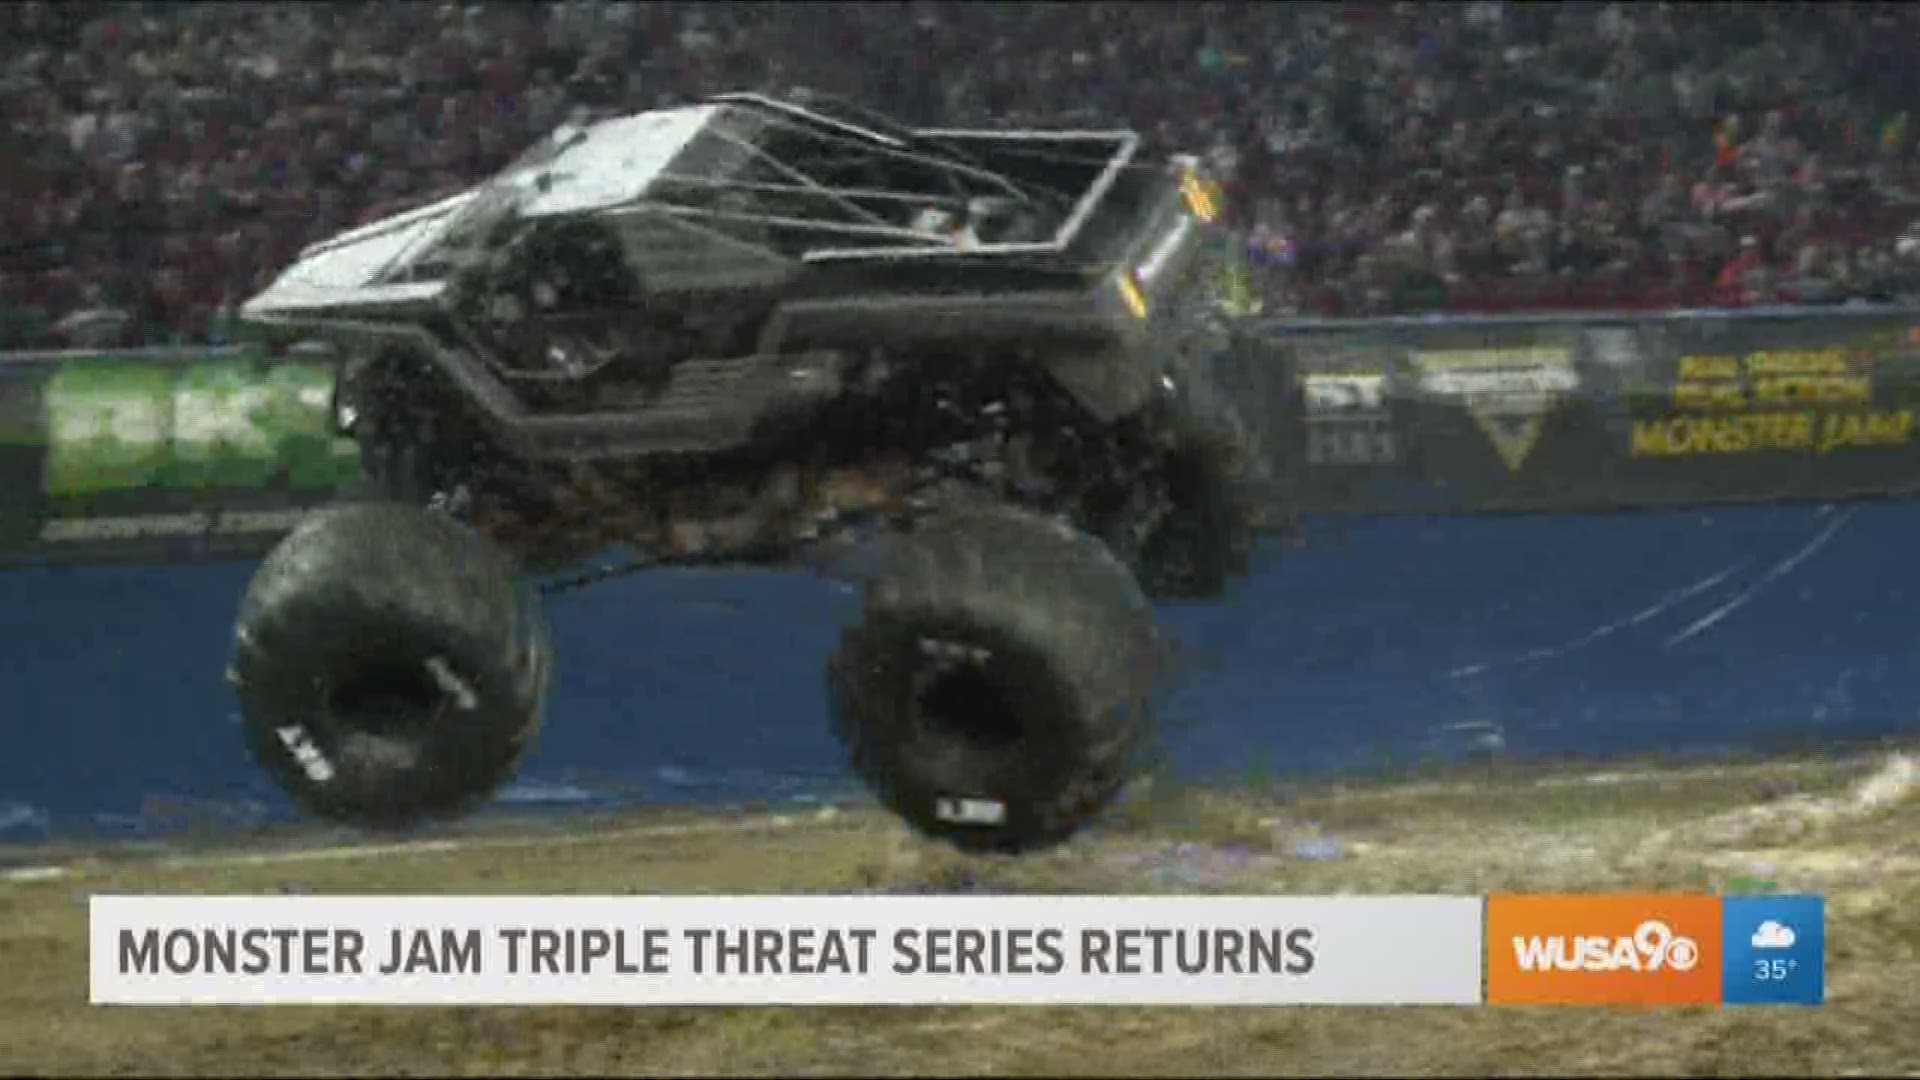 Monster Jam Triple Threat is this weekend at Capital One Arena. Driver Bernard Lyght tells us what to expect from the thrilling show!